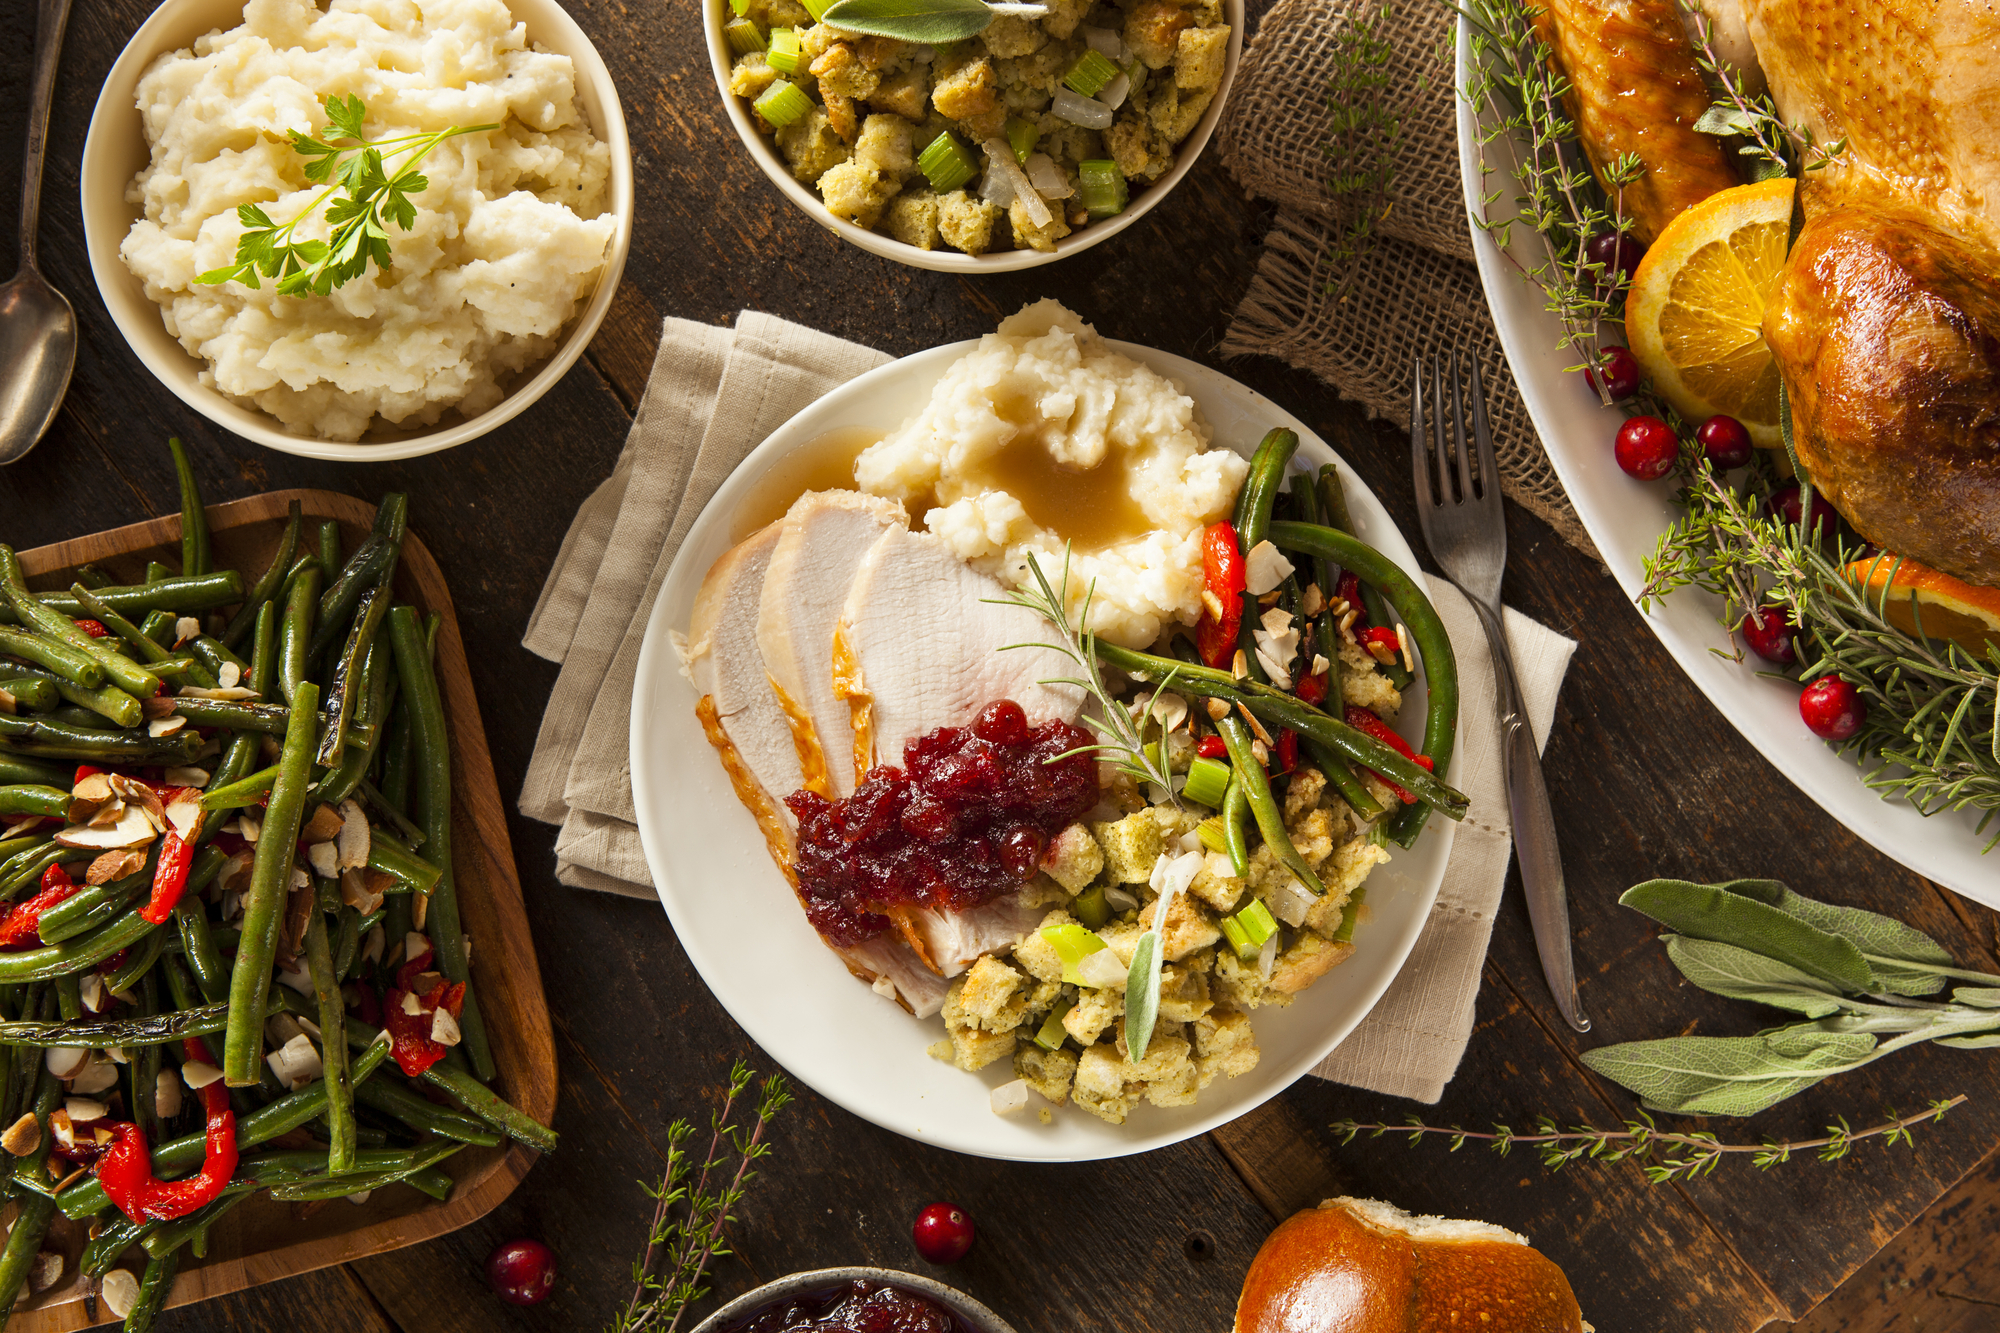 Gear up and cook the perfect Thanksgiving dinner